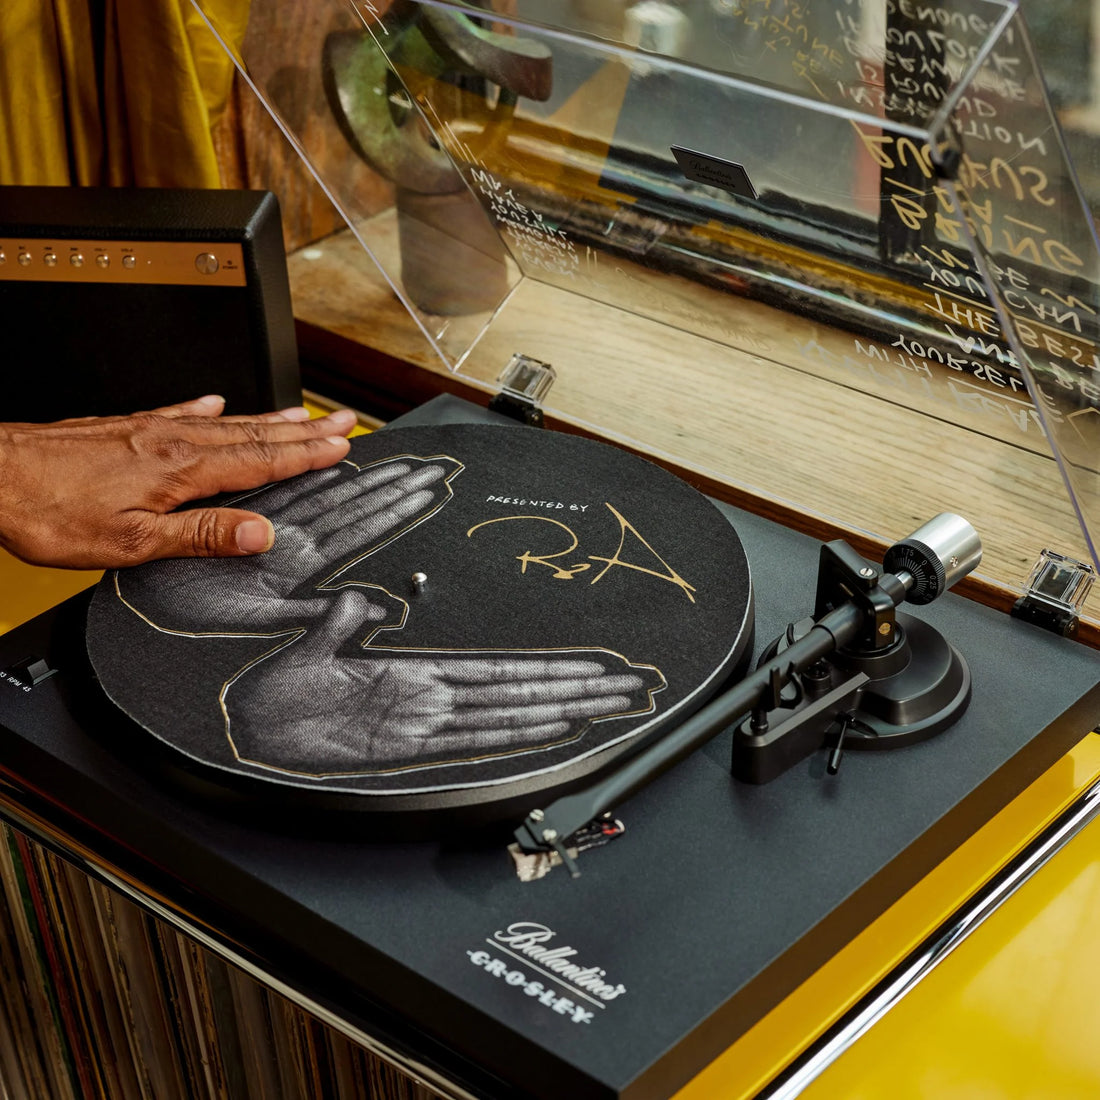 See RZA's Custom Vinyl Record Player and Speaker